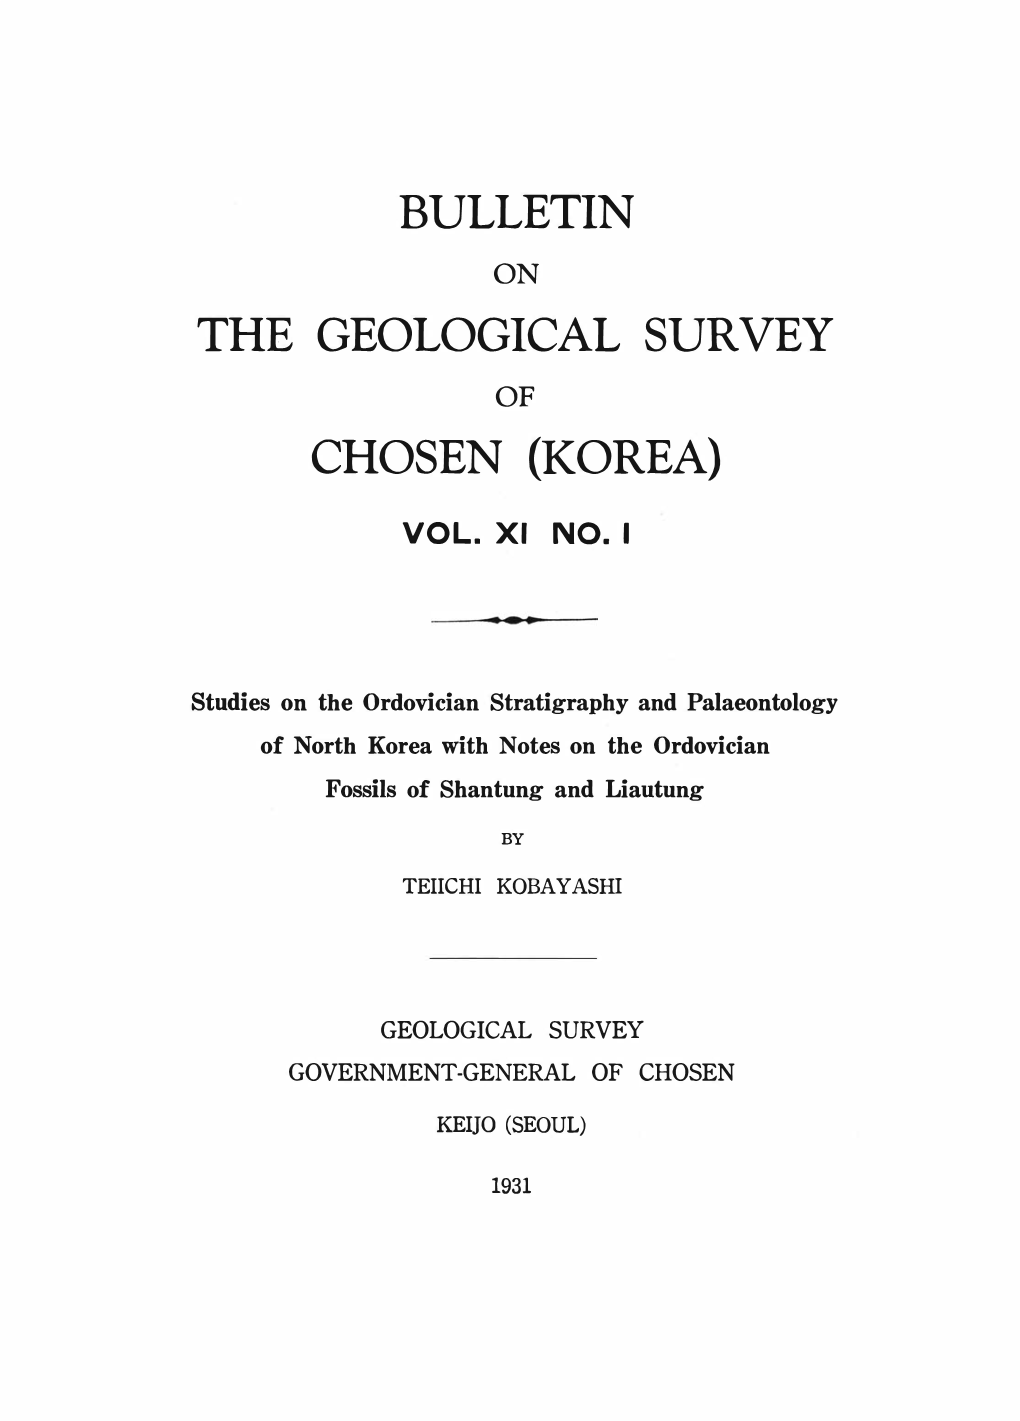 Studies on the Ordovician Stratigraphy and Palaeontology of North Korea with Notes on the Ordovician Fossils of Shantung and Liautung